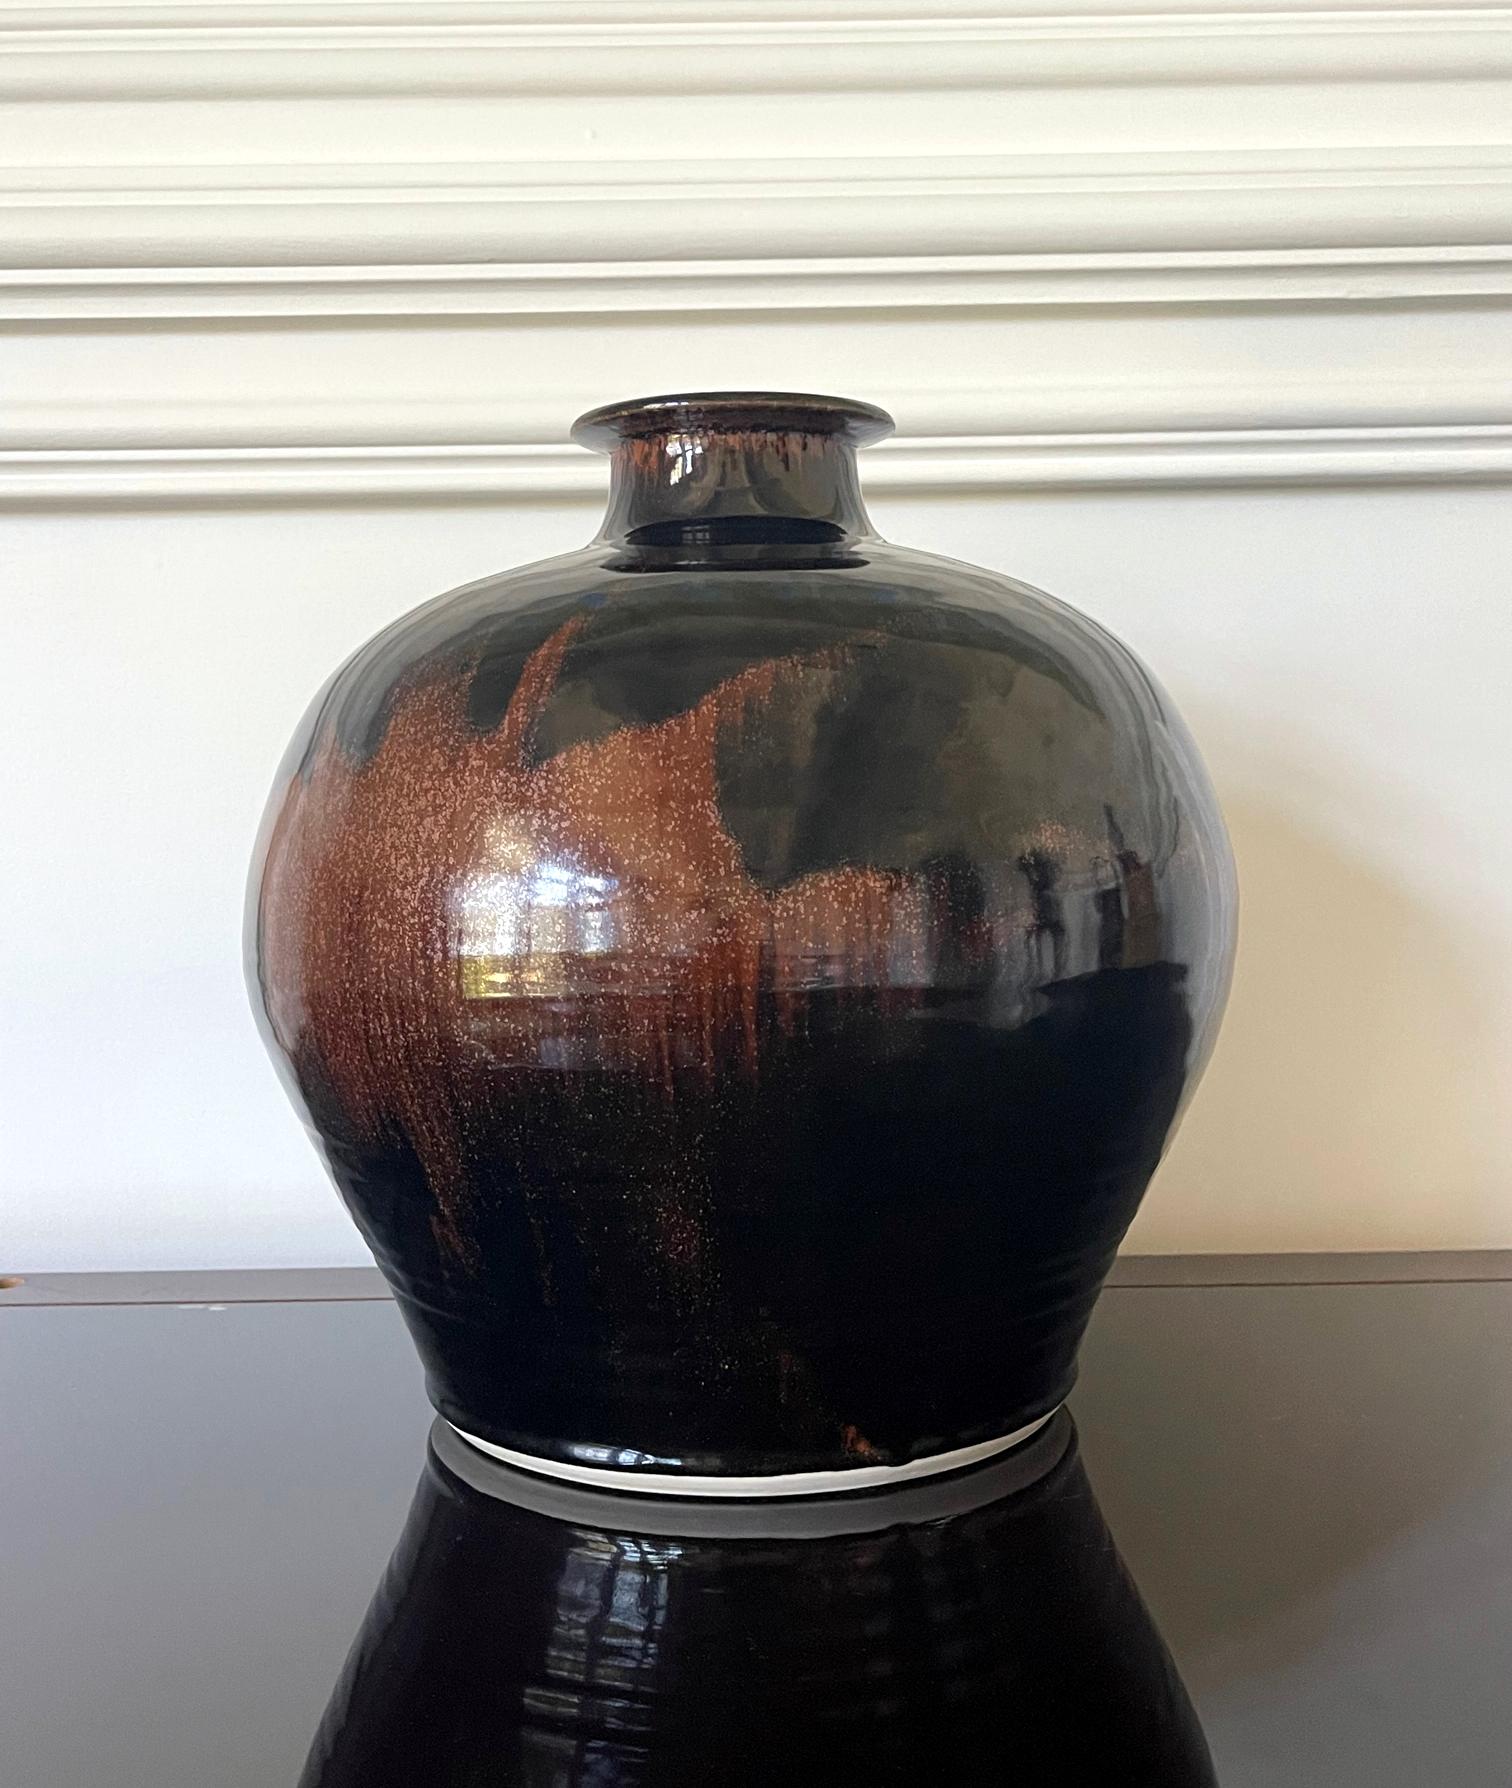 An early ceramic jar with a distinct Tenmoku glaze by Brother Thomas Bezanson (1929-2007) by Benedictine monk potter Brother Thomas Bezanson (1929-2007). The minimalistic robust form with a bulbous body and a short-necked mouth was unmistakably